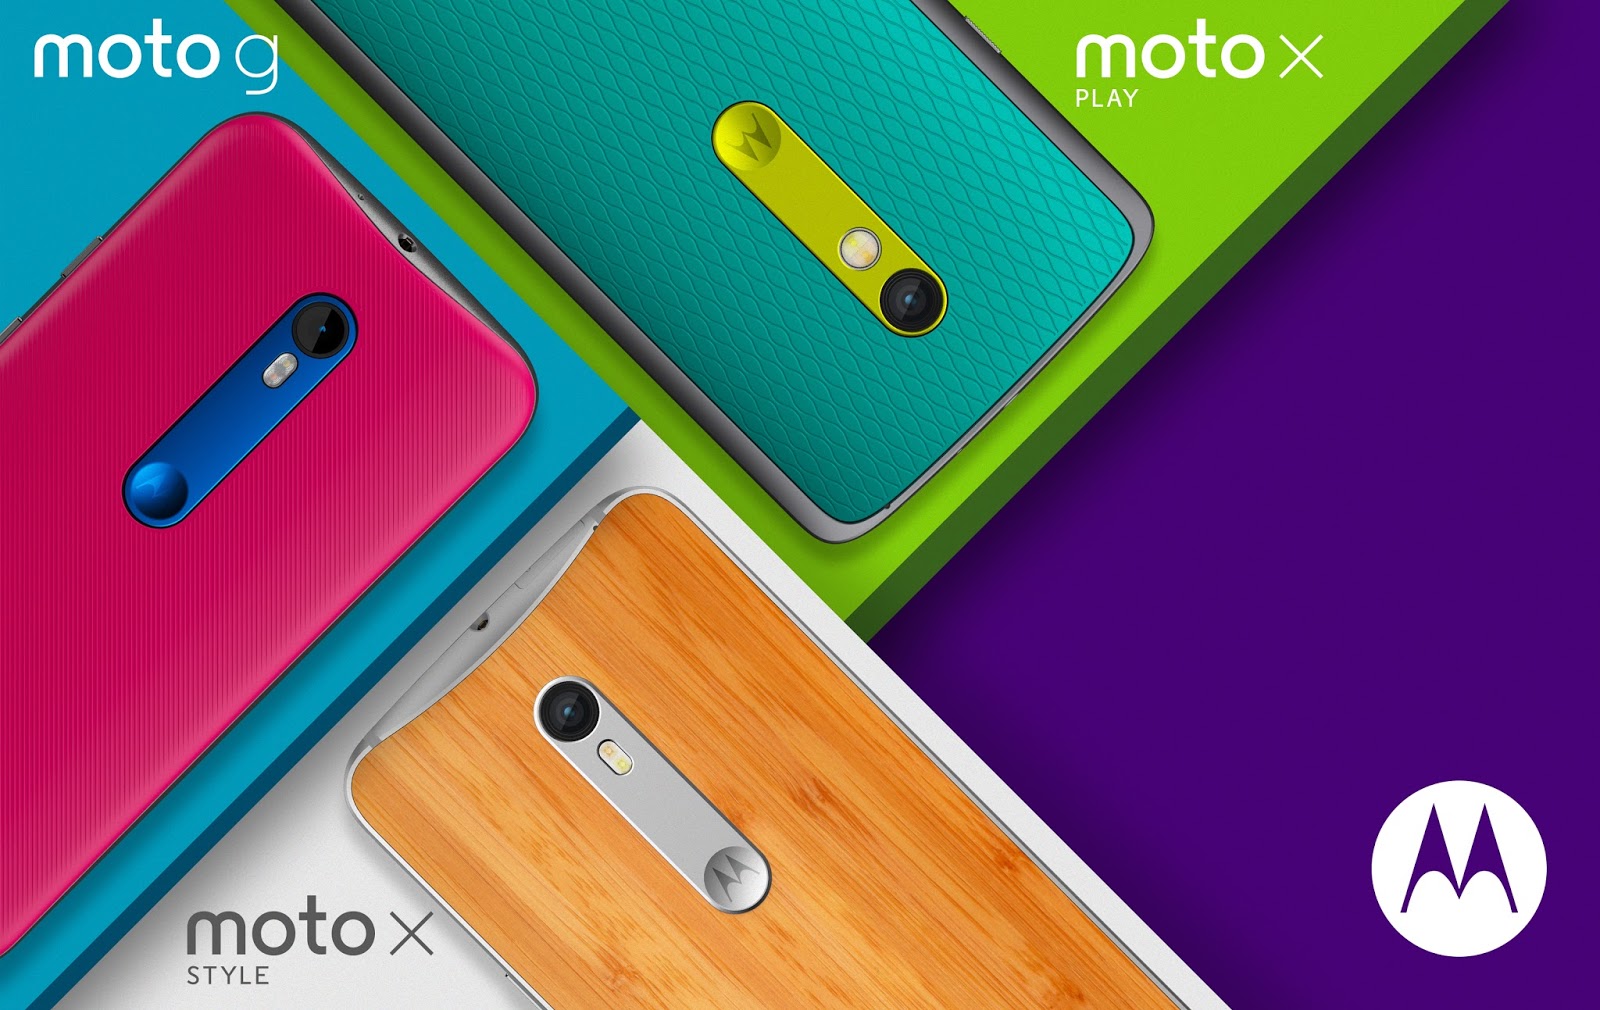 Motorola takes on Apple's iPhone with of new Moto handsets